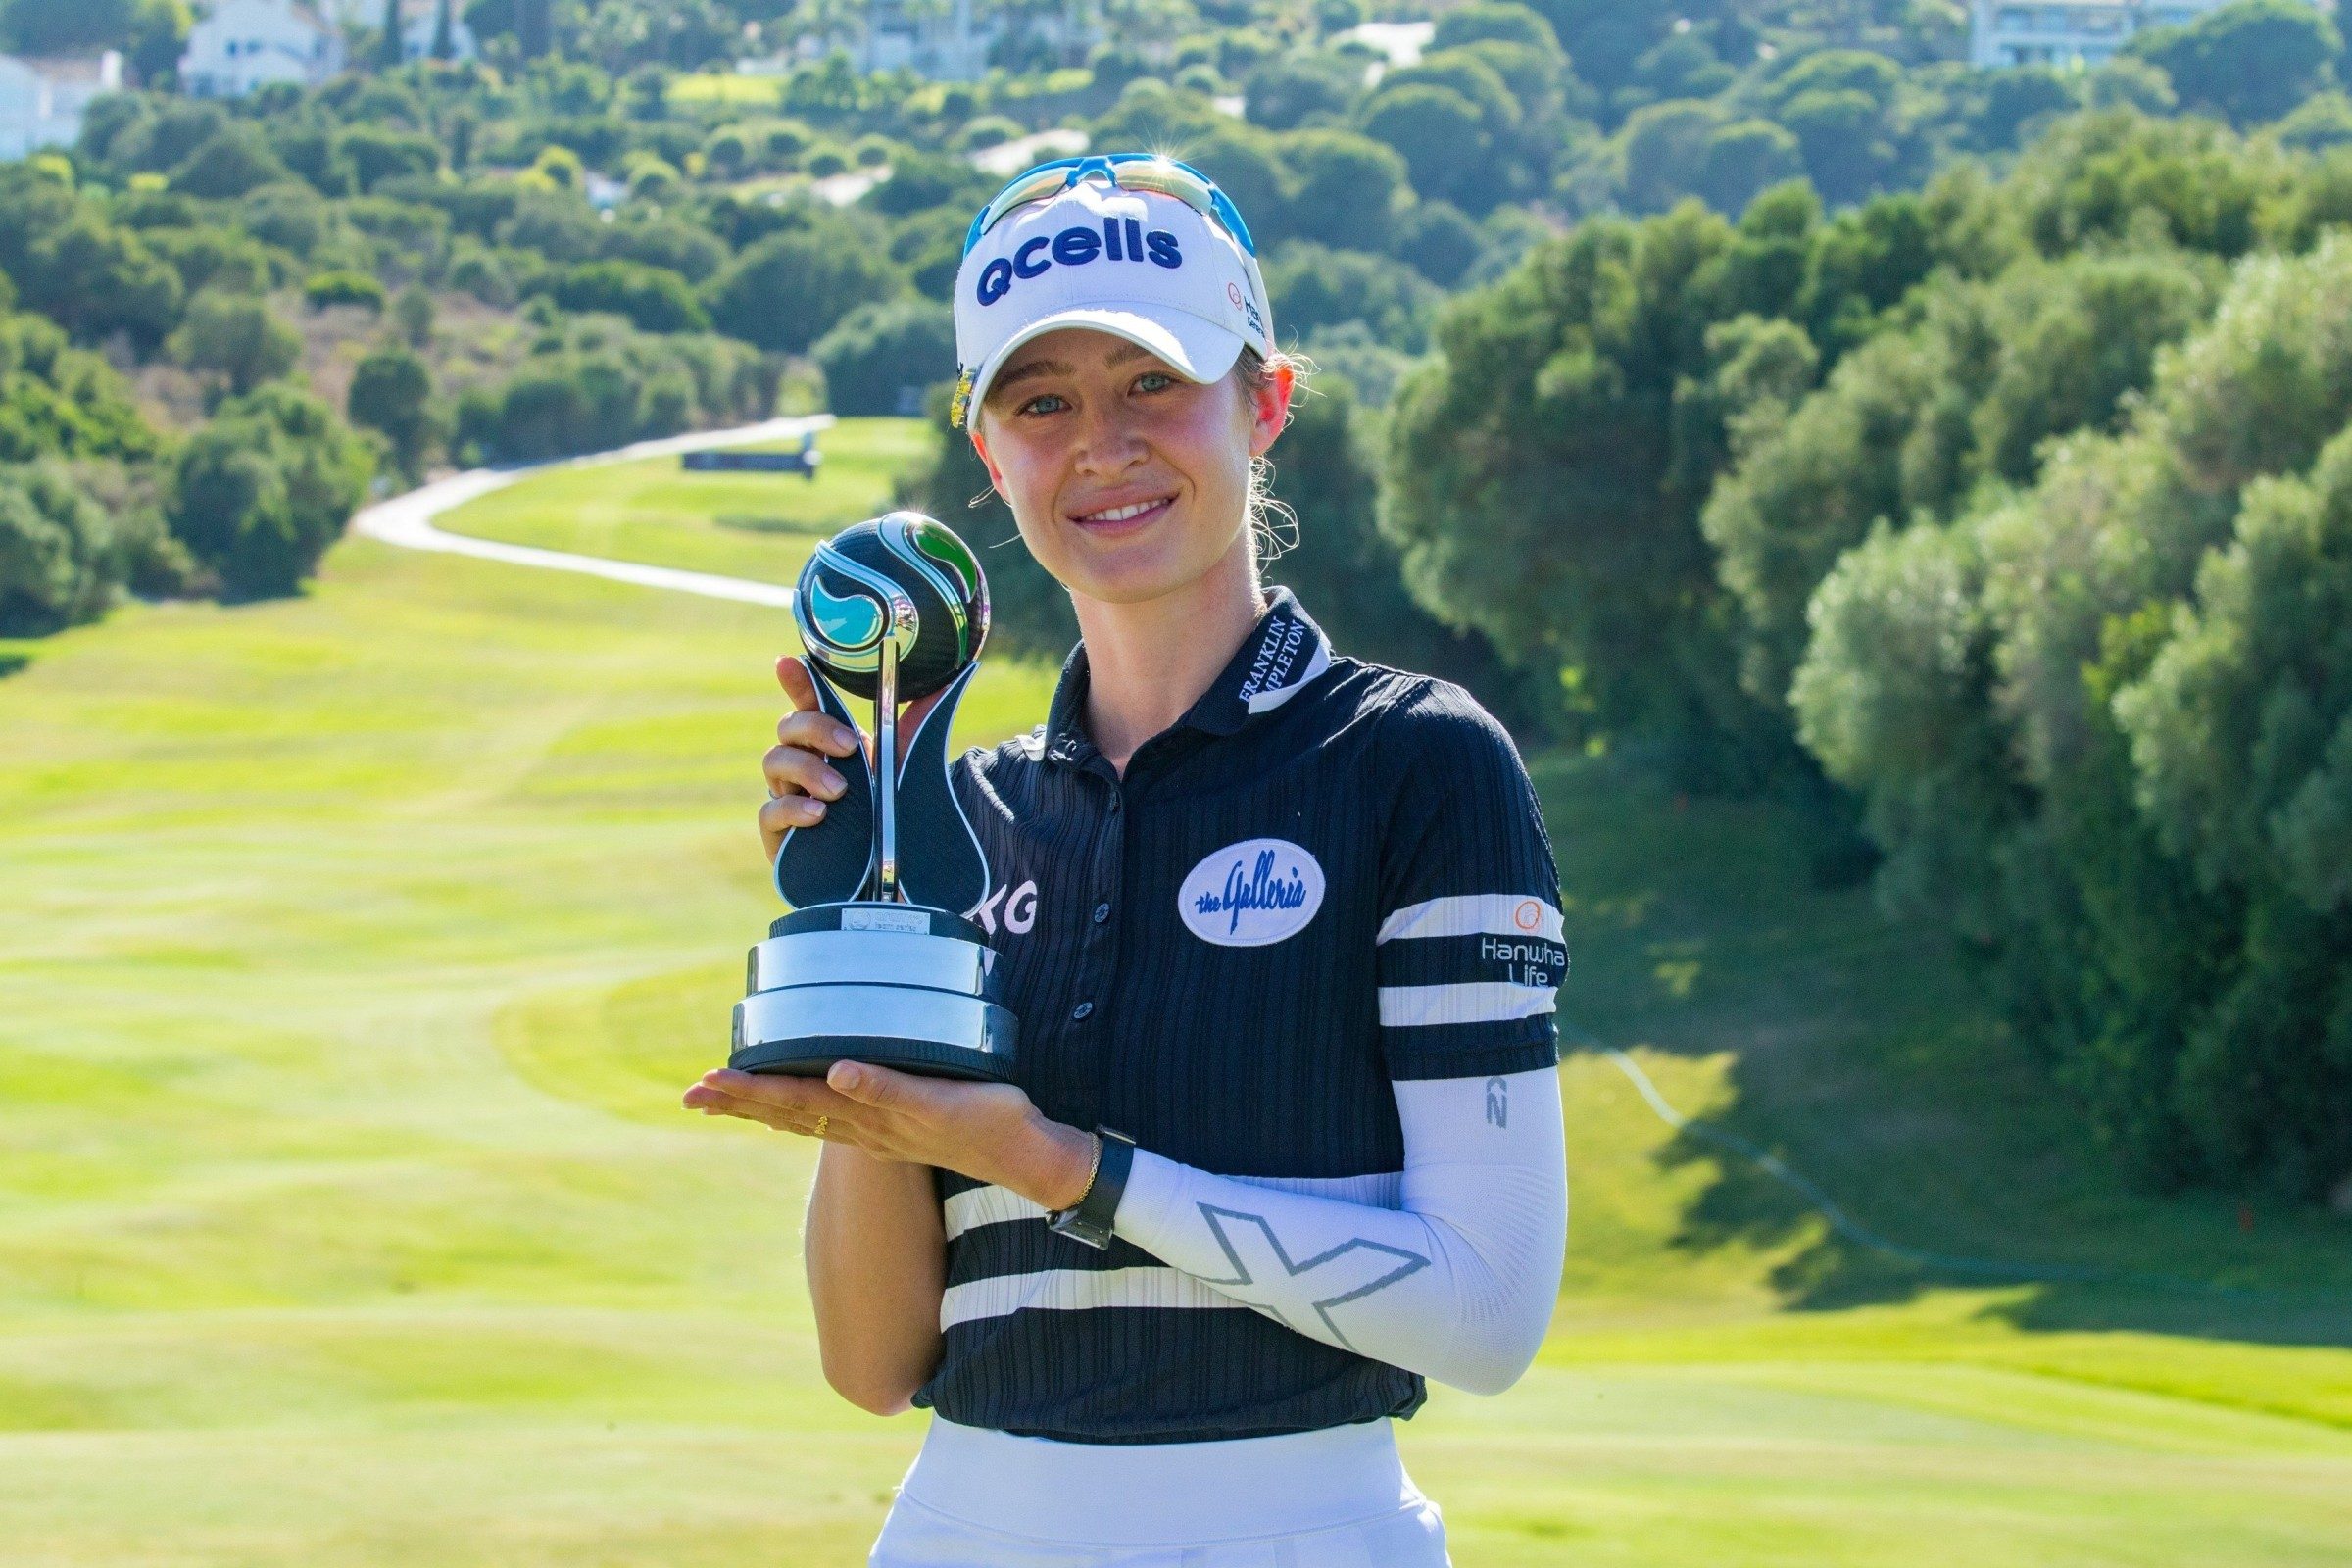 NELLY KORDA WINS INDIVIDUAL TITLE AT ARAMCO TEAM SERIES – SOTOGRANDE